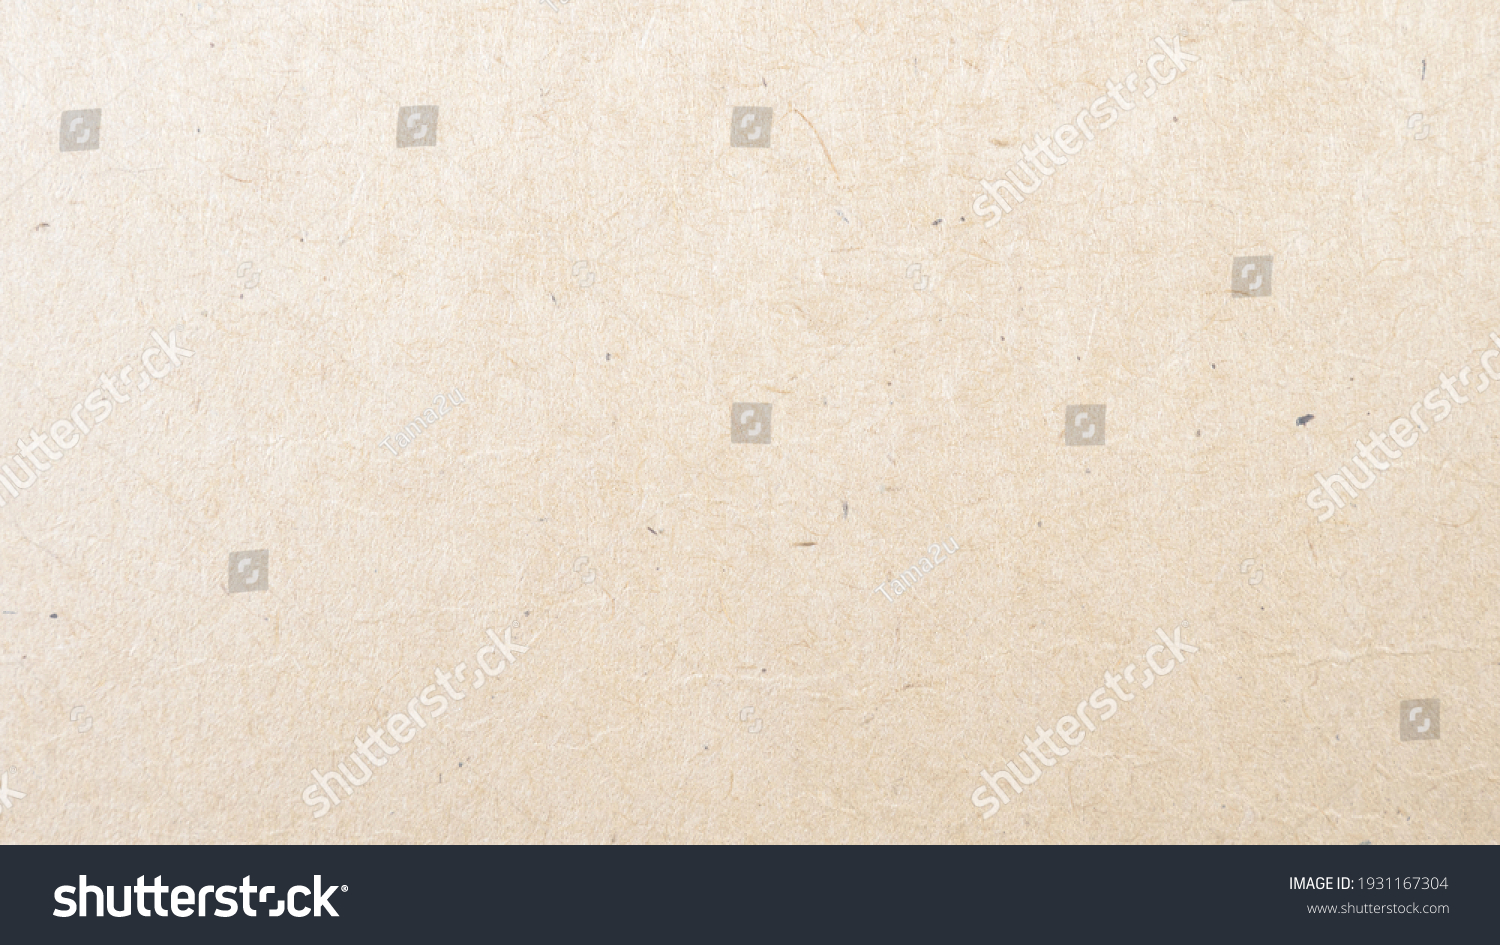 Abstract brown recycled paper texture background.
Old Kraft paper box craft pattern.
top view. #1931167304